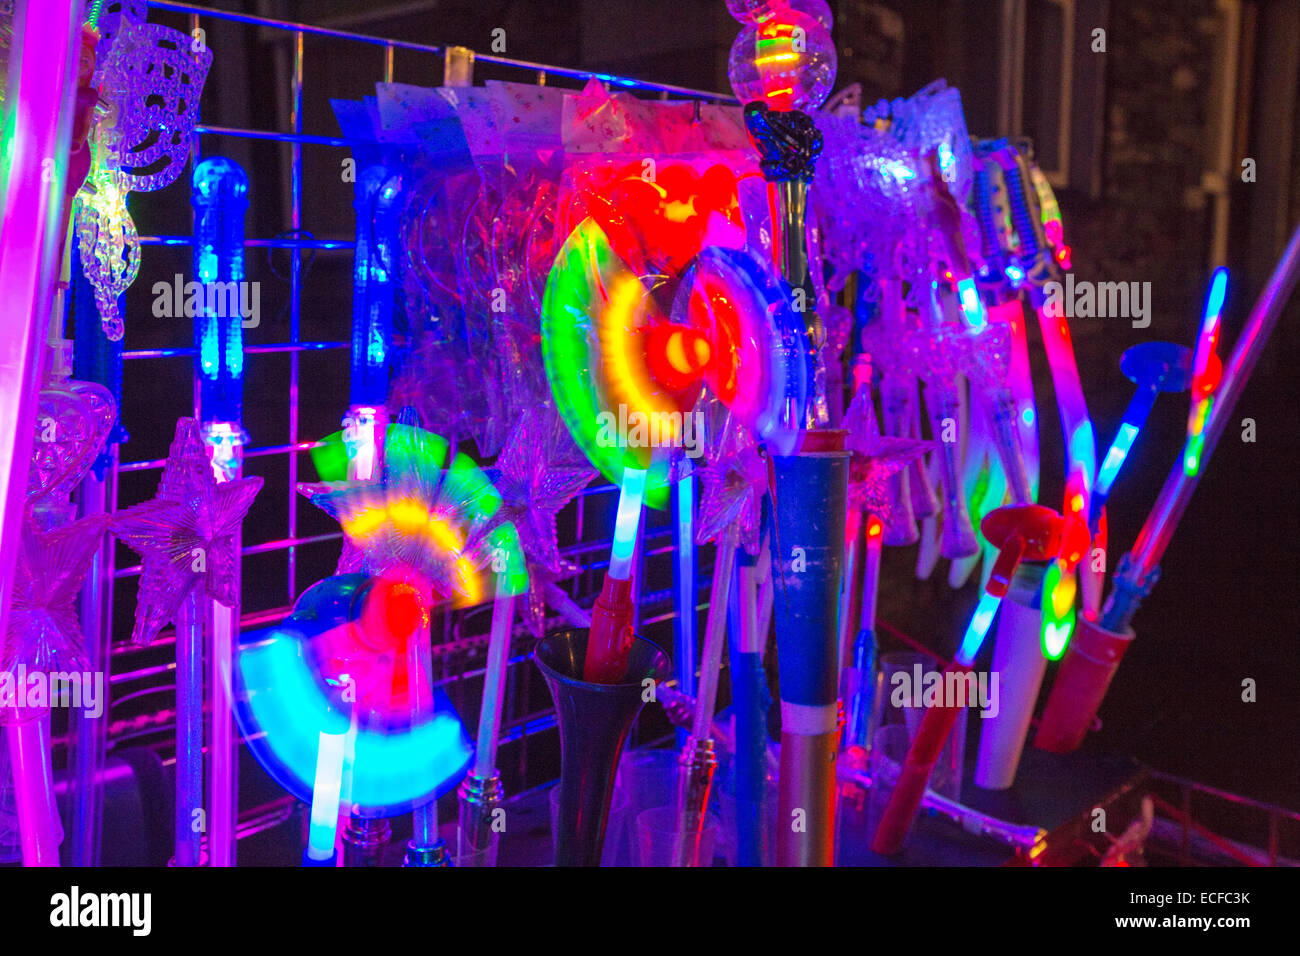 Neon light toys for sale at a stall in Ambleside, UK. Stock Photo